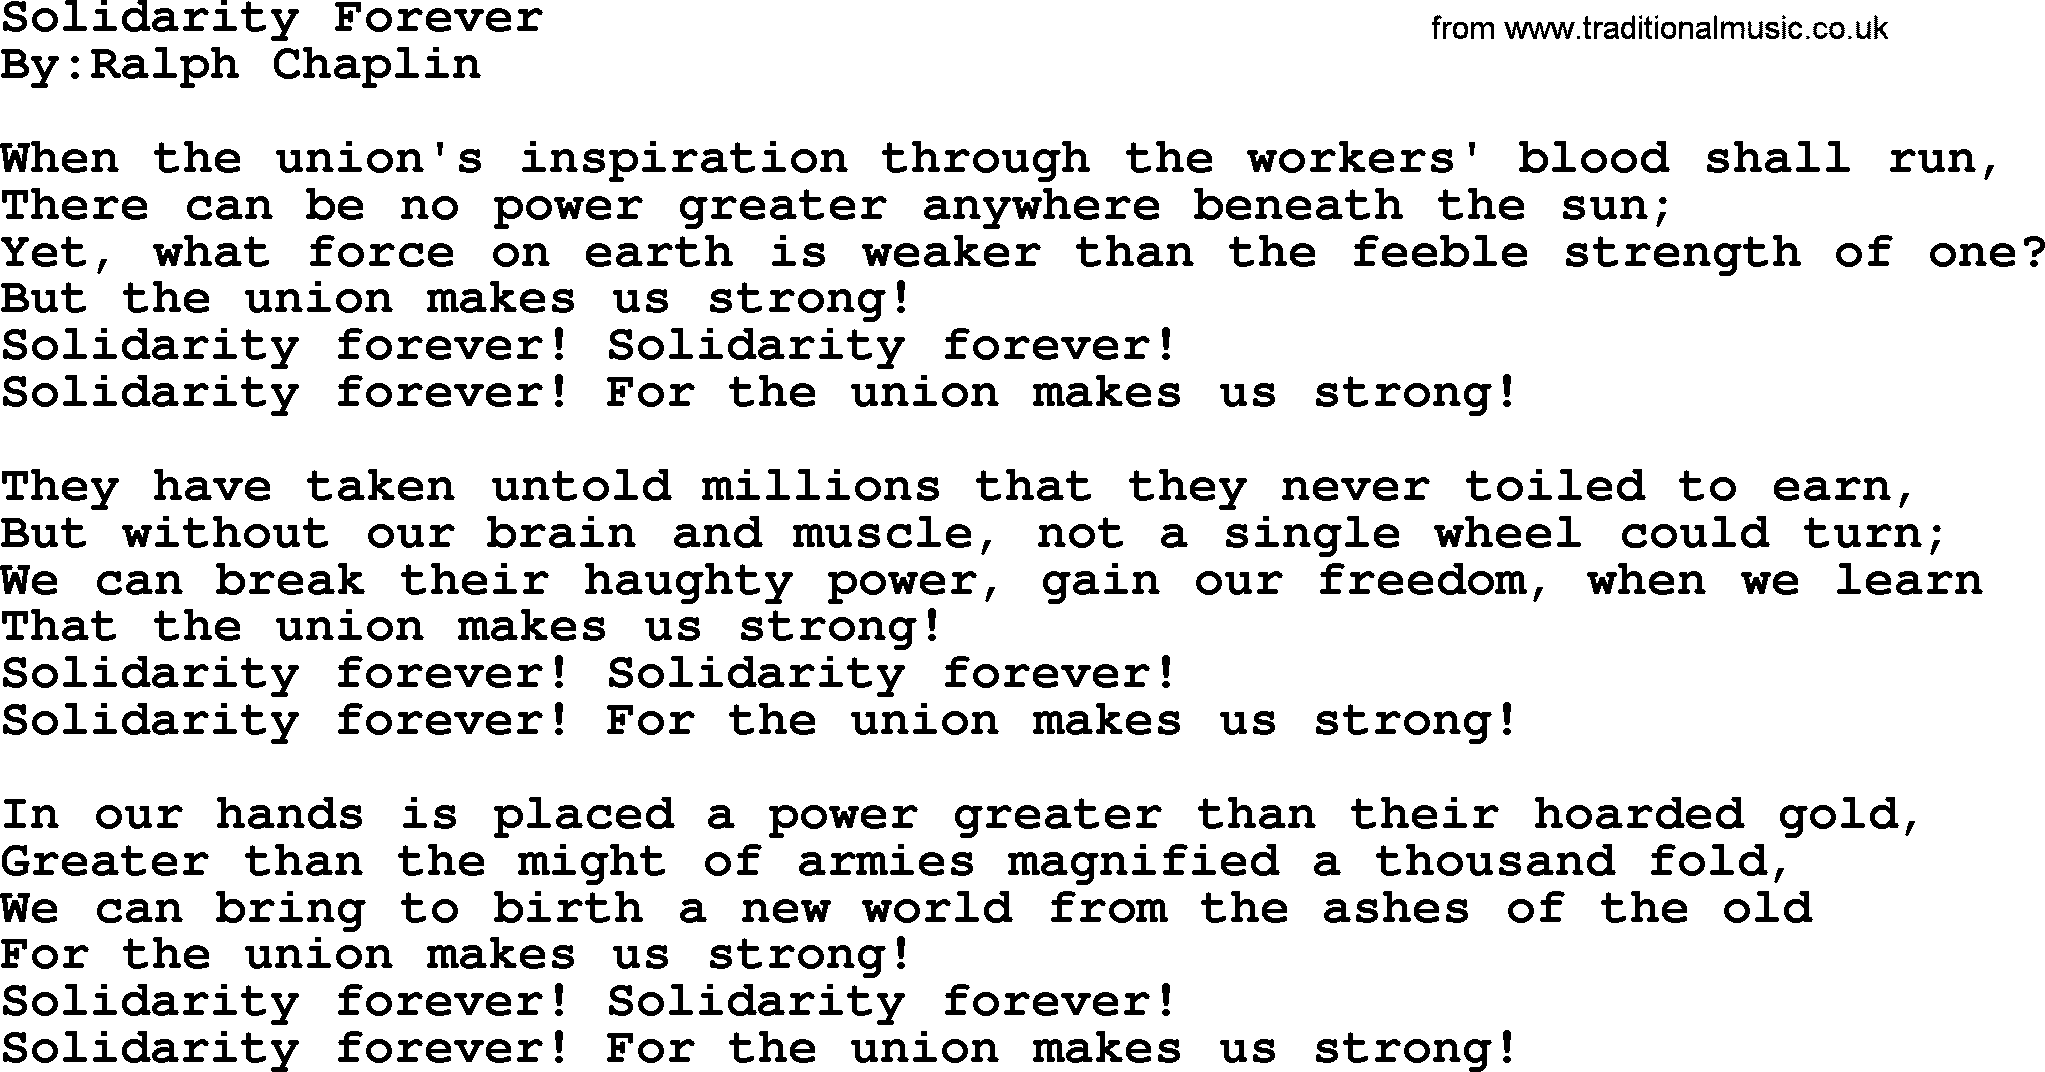 Political, Solidarity, Workers or Union song: Solidarity Forever, lyrics